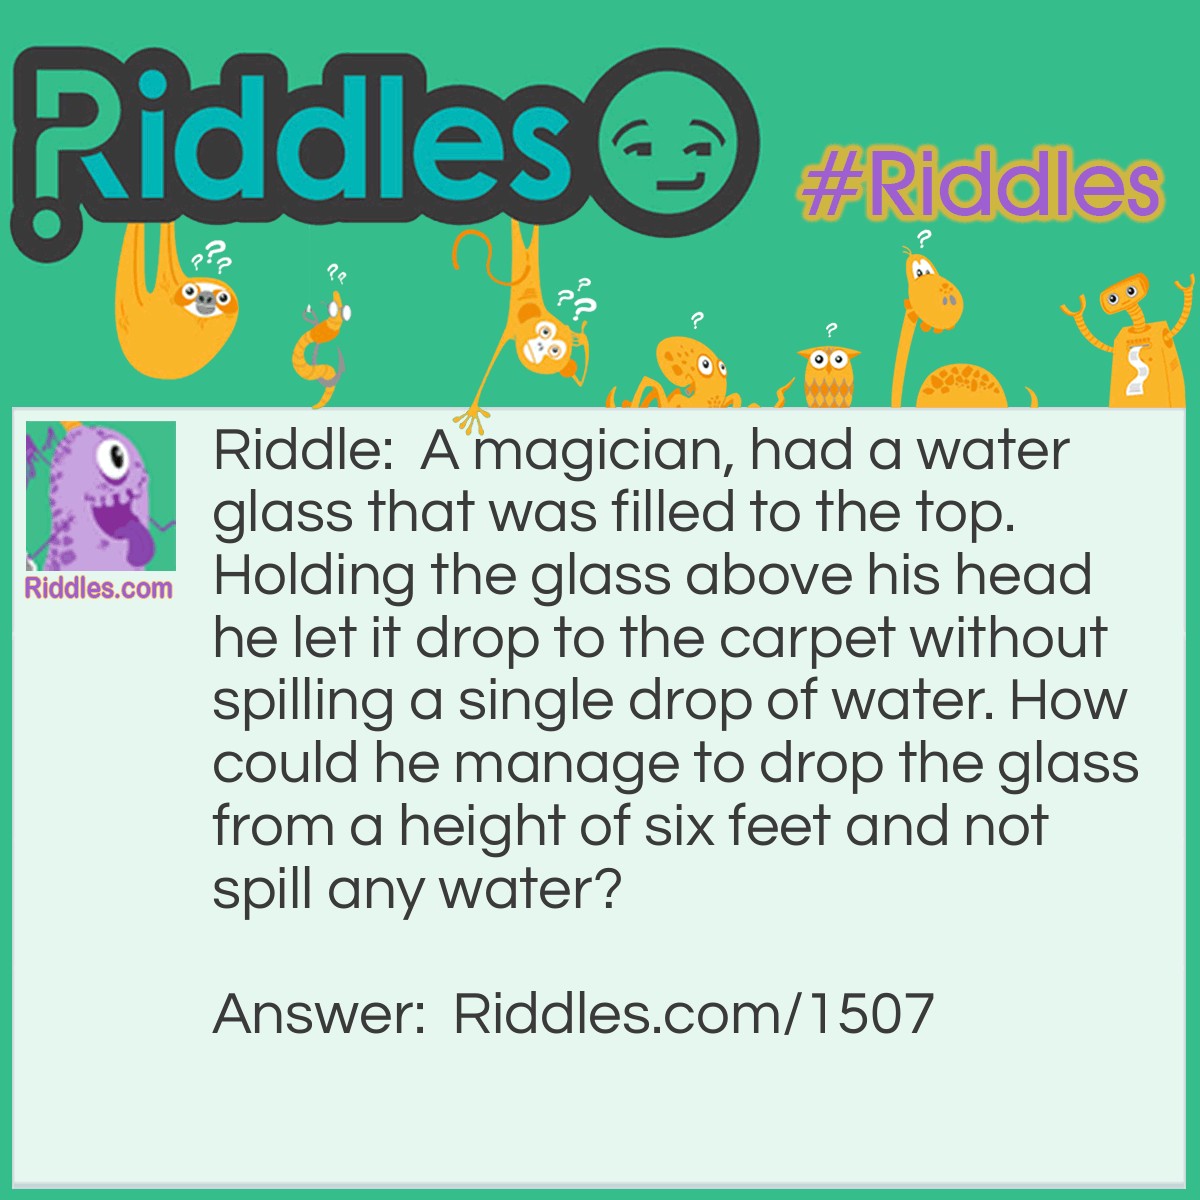 Riddle: A magician, had a water glass that was filled to the top. Holding the glass above his head he let it drop to the carpet without spilling a single drop of water. How could he manage to drop the glass from a height of six feet and not spill any water? Answer: The glass was filled, but not with water.